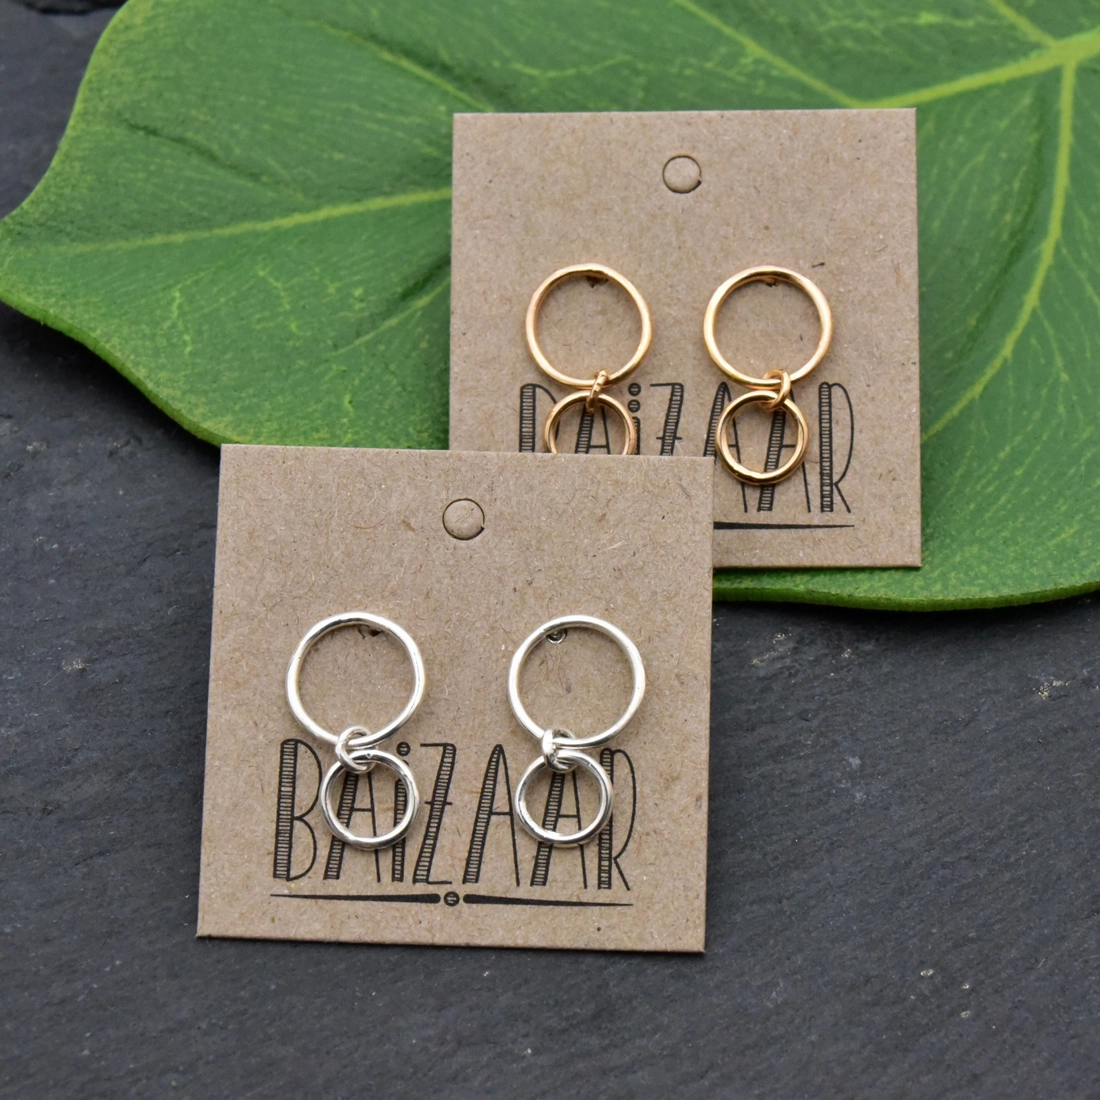 Gold or Silver connecting circle earrings